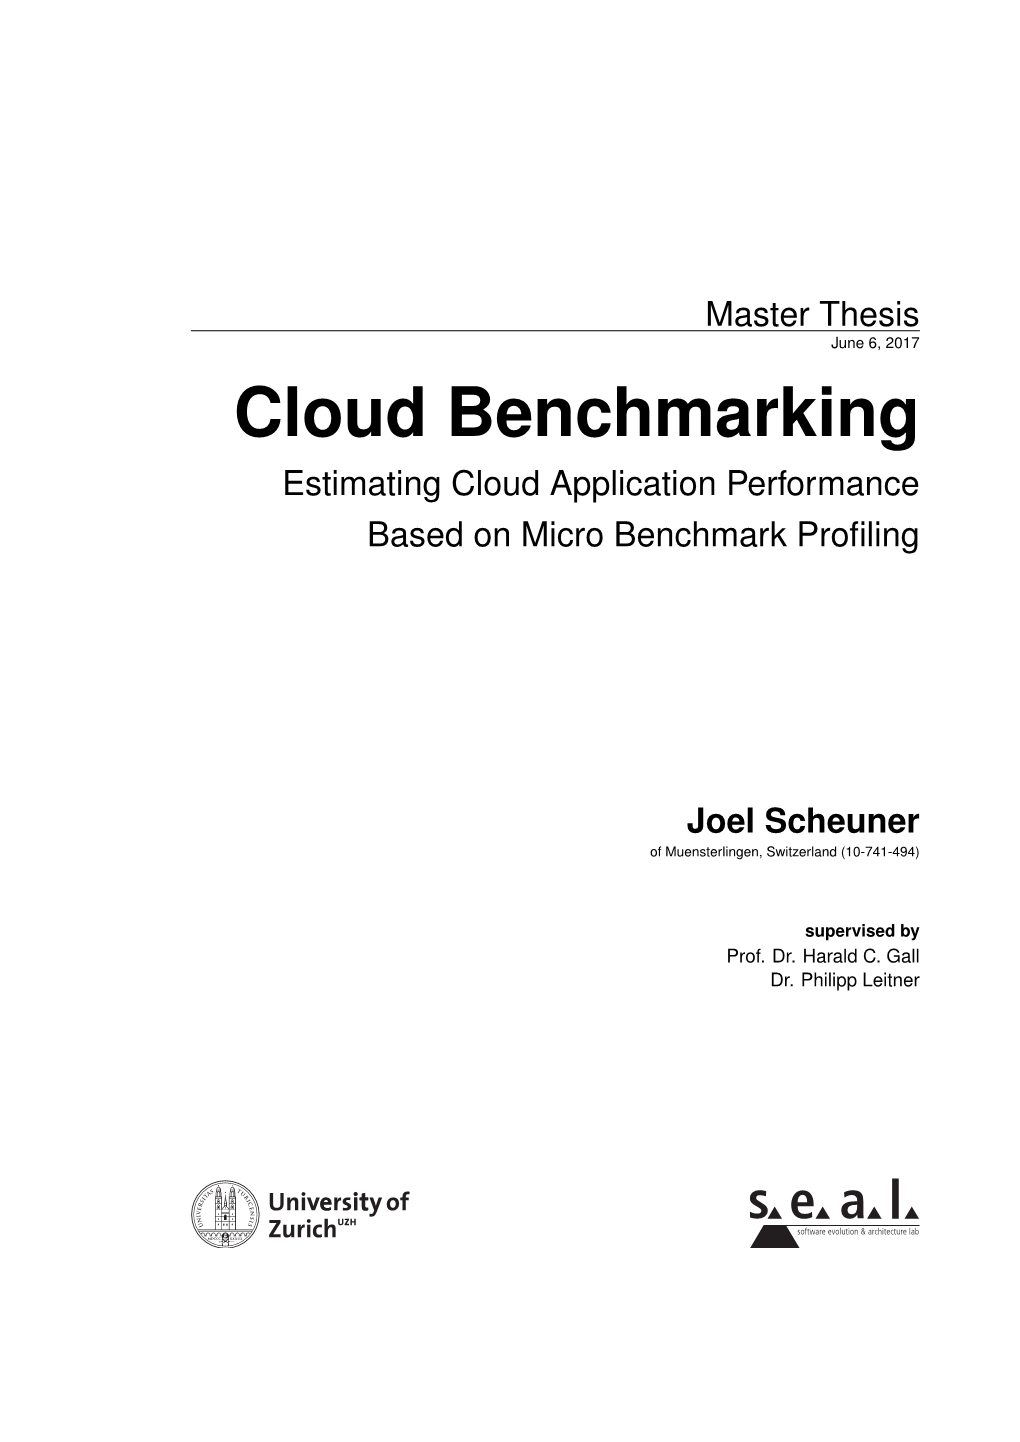 Cloud Benchmarking Estimating Cloud Application Performance Based on Micro Benchmark Proﬁling